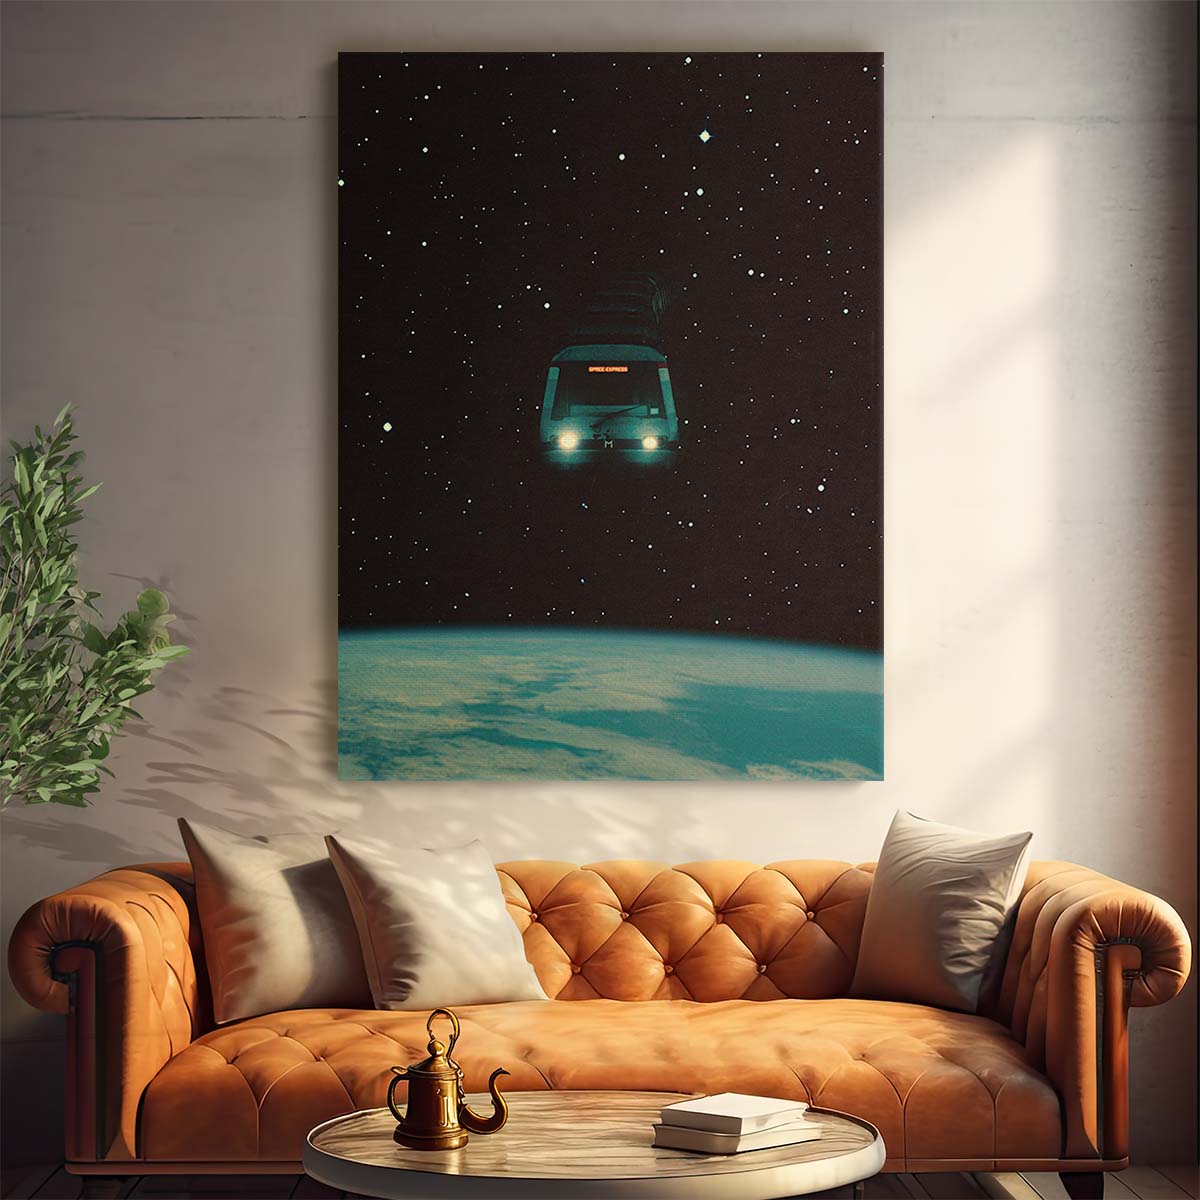 Surreal Space Express Digital Collage Artwork - Retro Futuristic Universe Landscape by Luxuriance Designs, made in USA